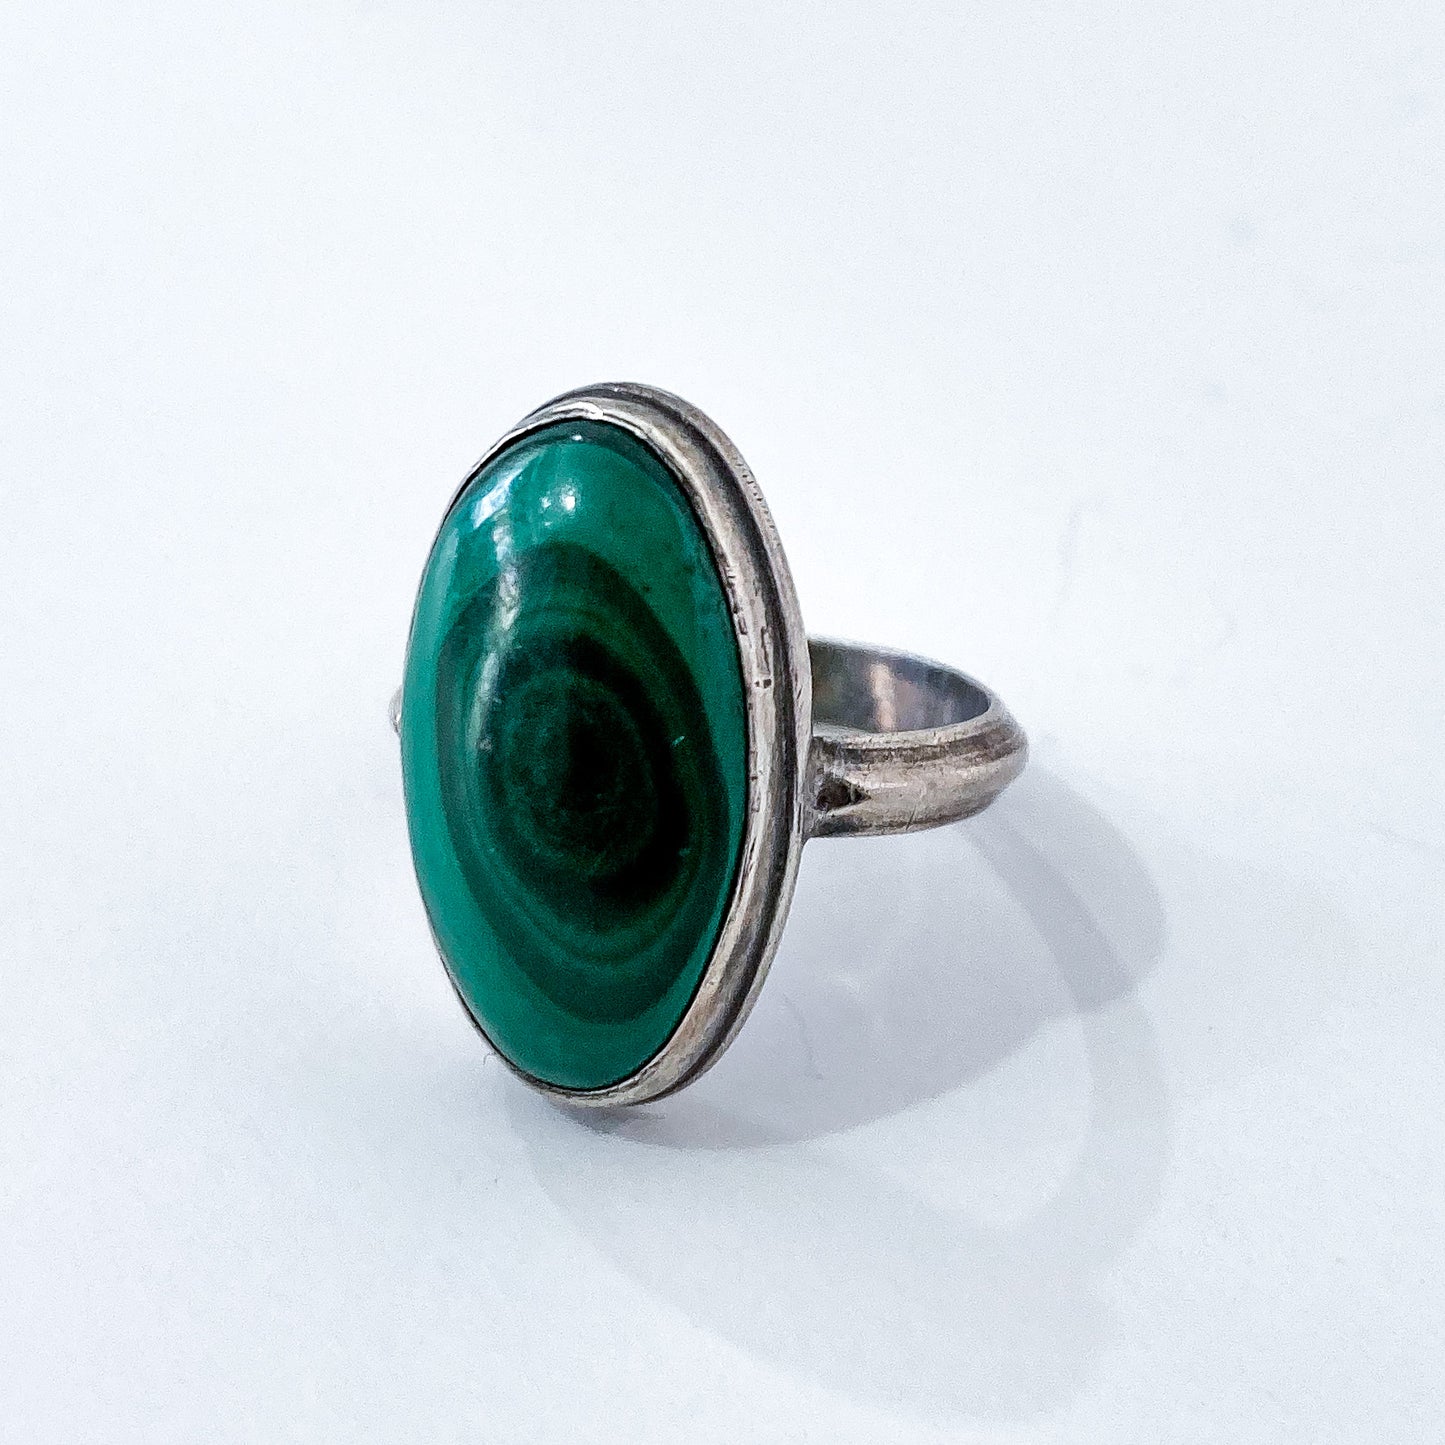 Vintage Domed Oval Swirling Rich Green Malachite Sterling Silver Ring Slightly Angled Front